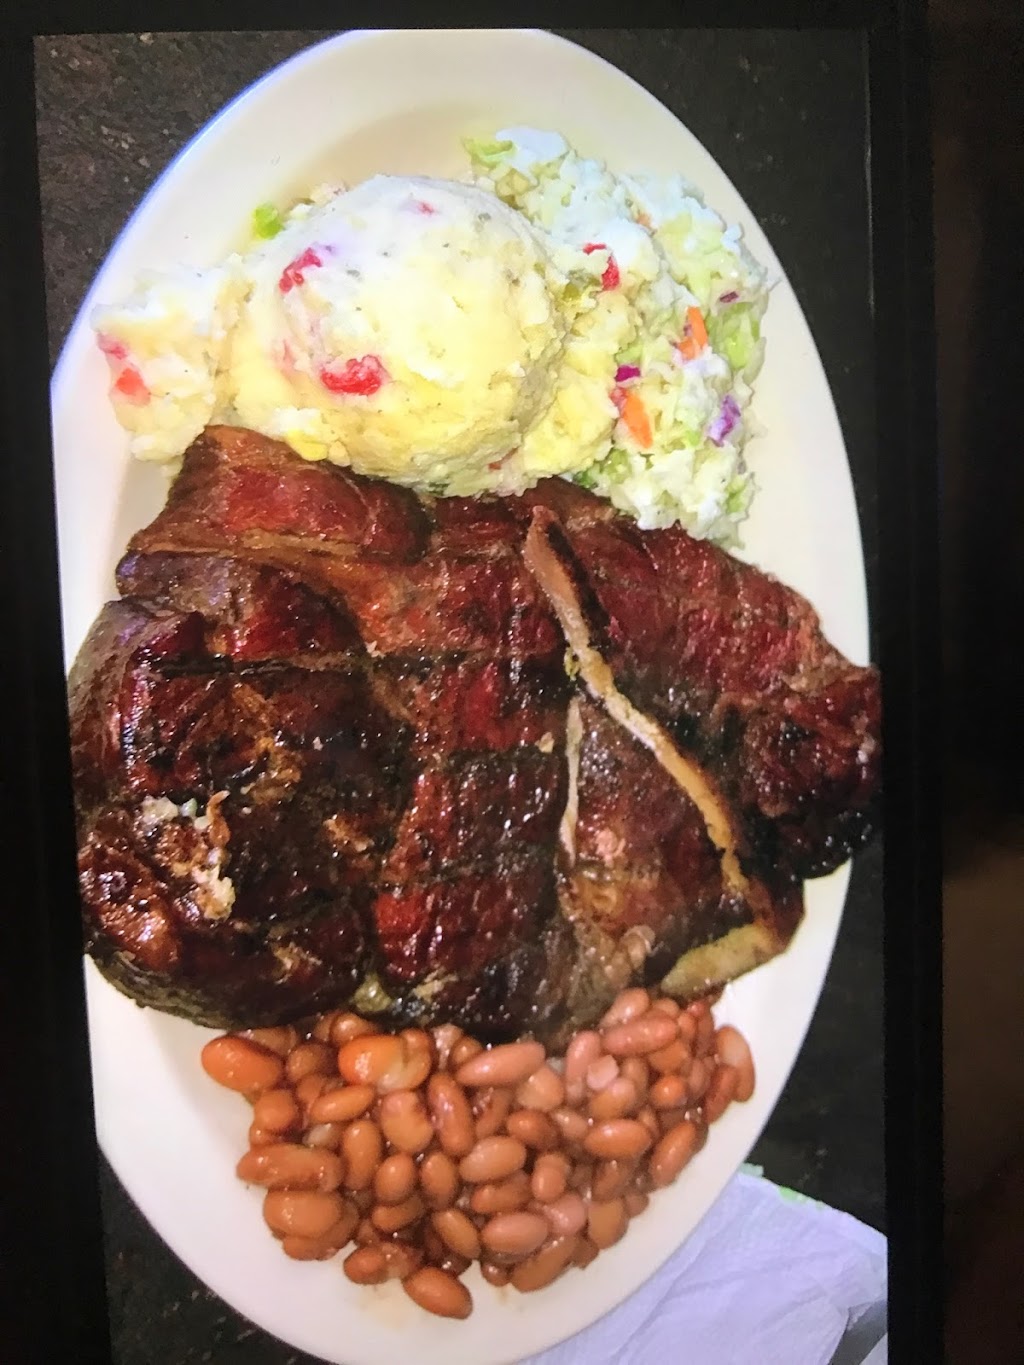 Js BBQ & Catering | 2003 OK-37, Tuttle, OK 73089, USA | Phone: (405) 888-9099